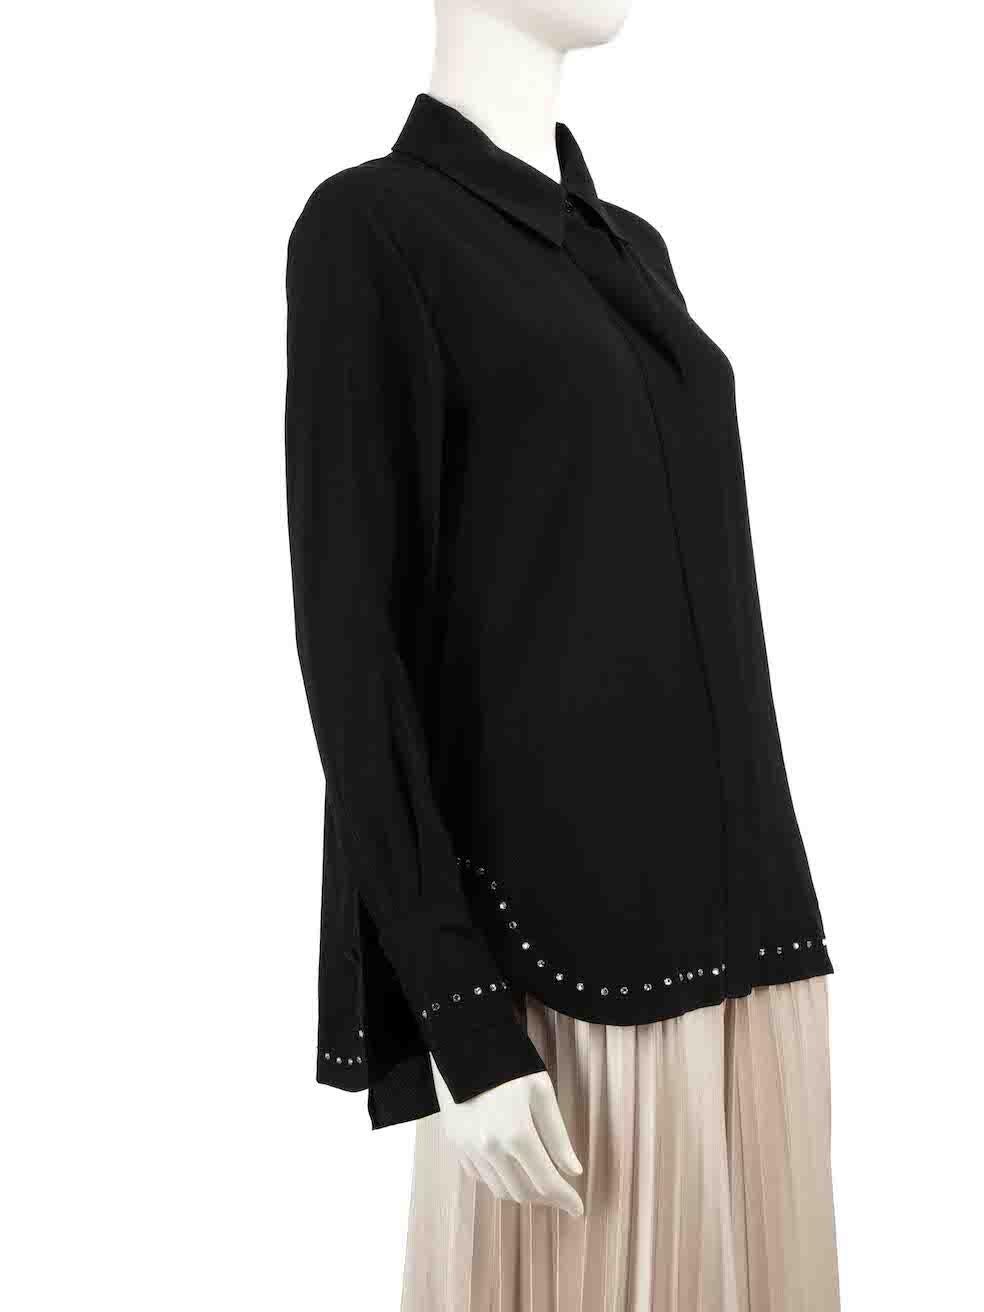 CONDITION is Never worn, with tags. No visible wear to shirt is evident on this new Chloé designer resale item.
 
Details
Black
Silk
Long sleeves blouse
Front button up closure
Crystal embellished detail on hemline
Buttoned cuffs
 
Made in Slovakia
